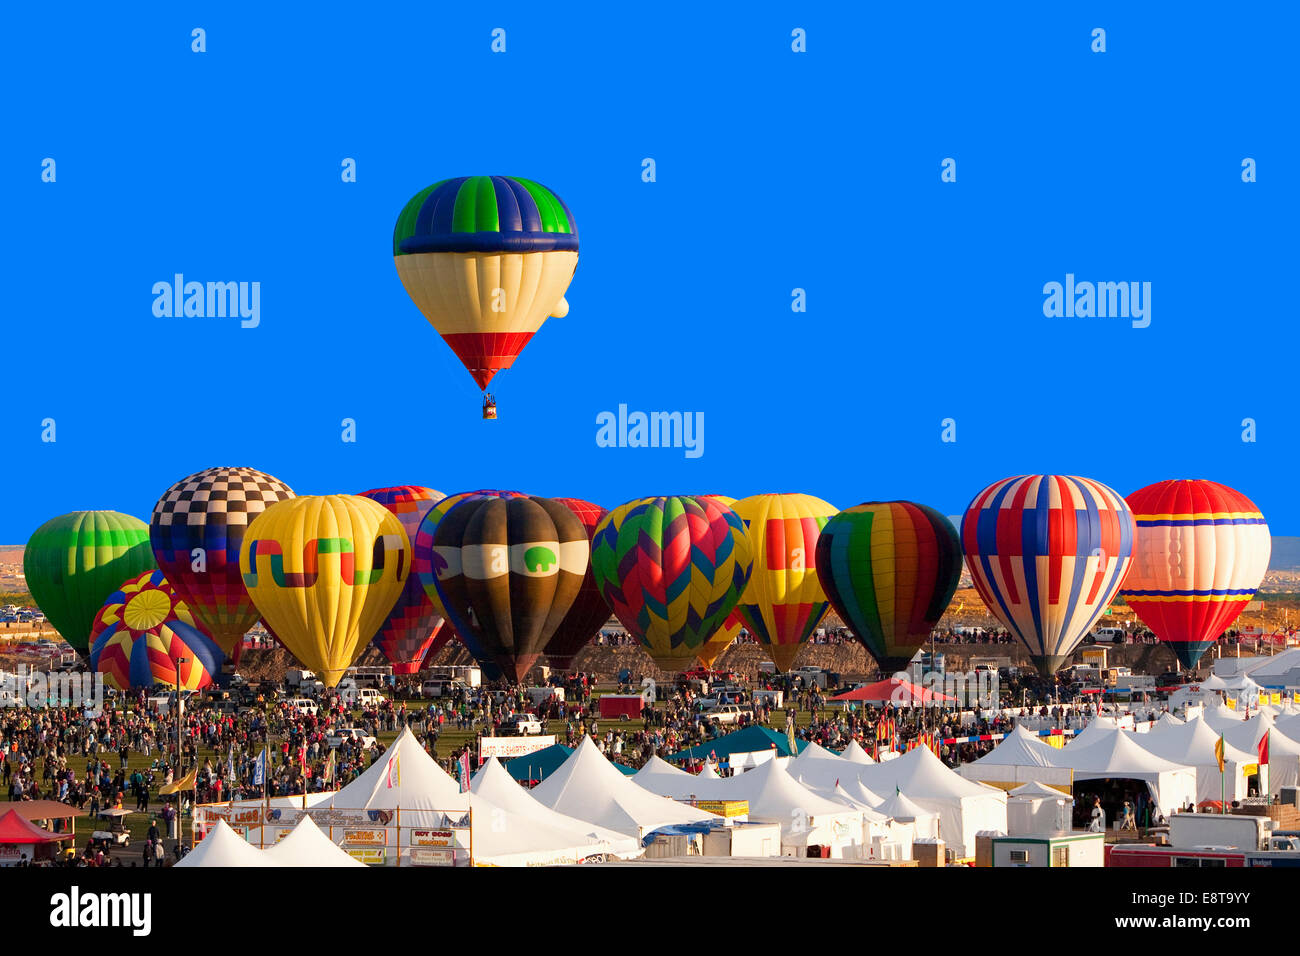 Hot air balloon floating above others at festival, Albuquerque, New Mexico, United States Stock Photo